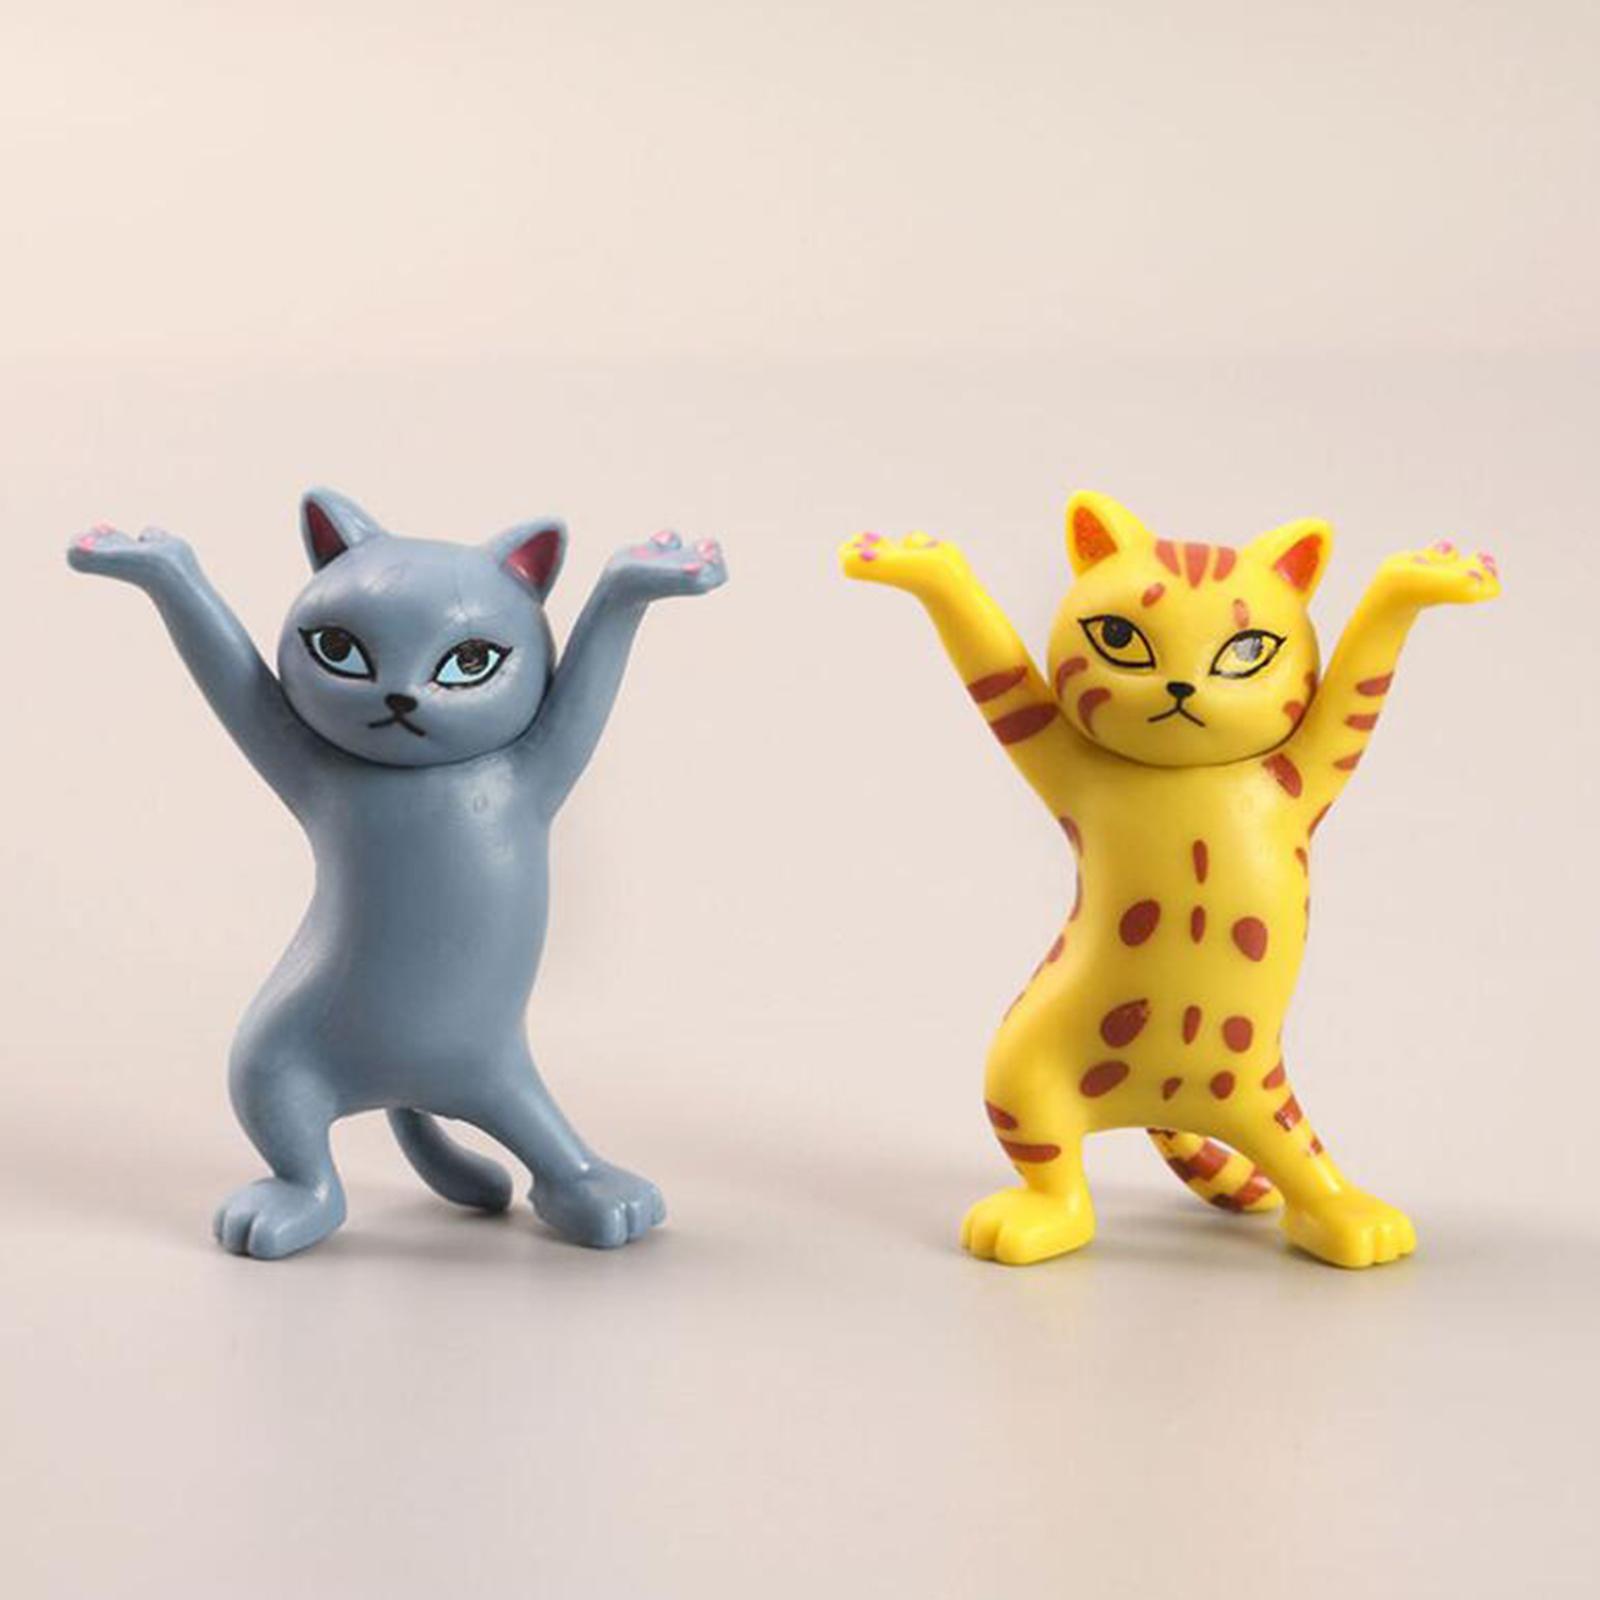 Dancing Cute Cats Lifting Dance Figure Action Toy Tabletop Sculpture Display Yellow